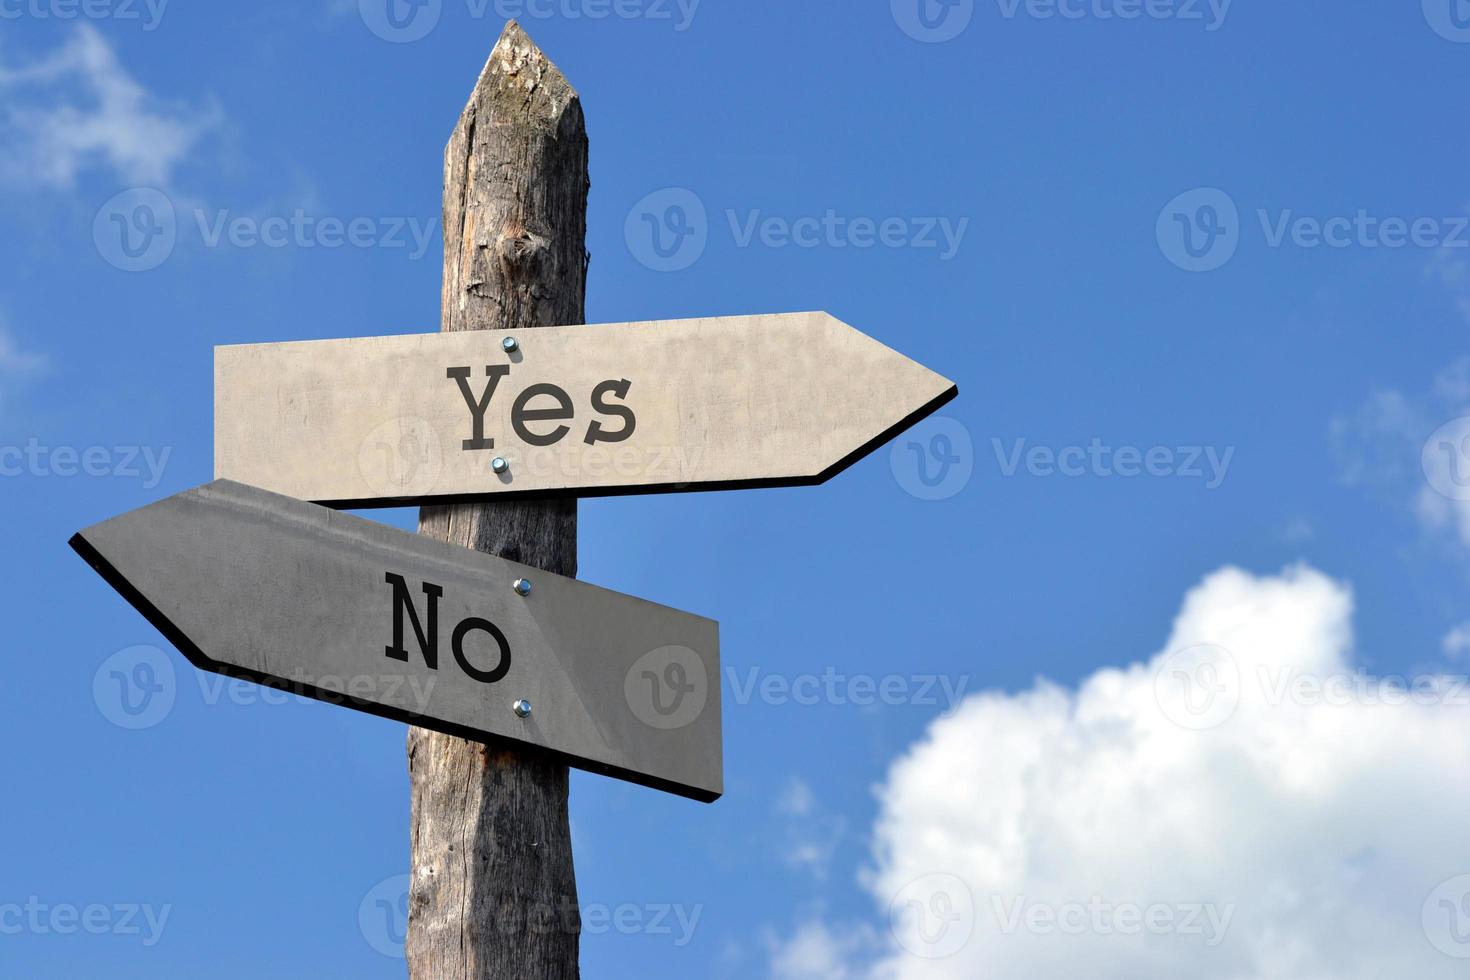 Yes or No - Wooden Signpost with Two Arrows, Sky with Clouds photo